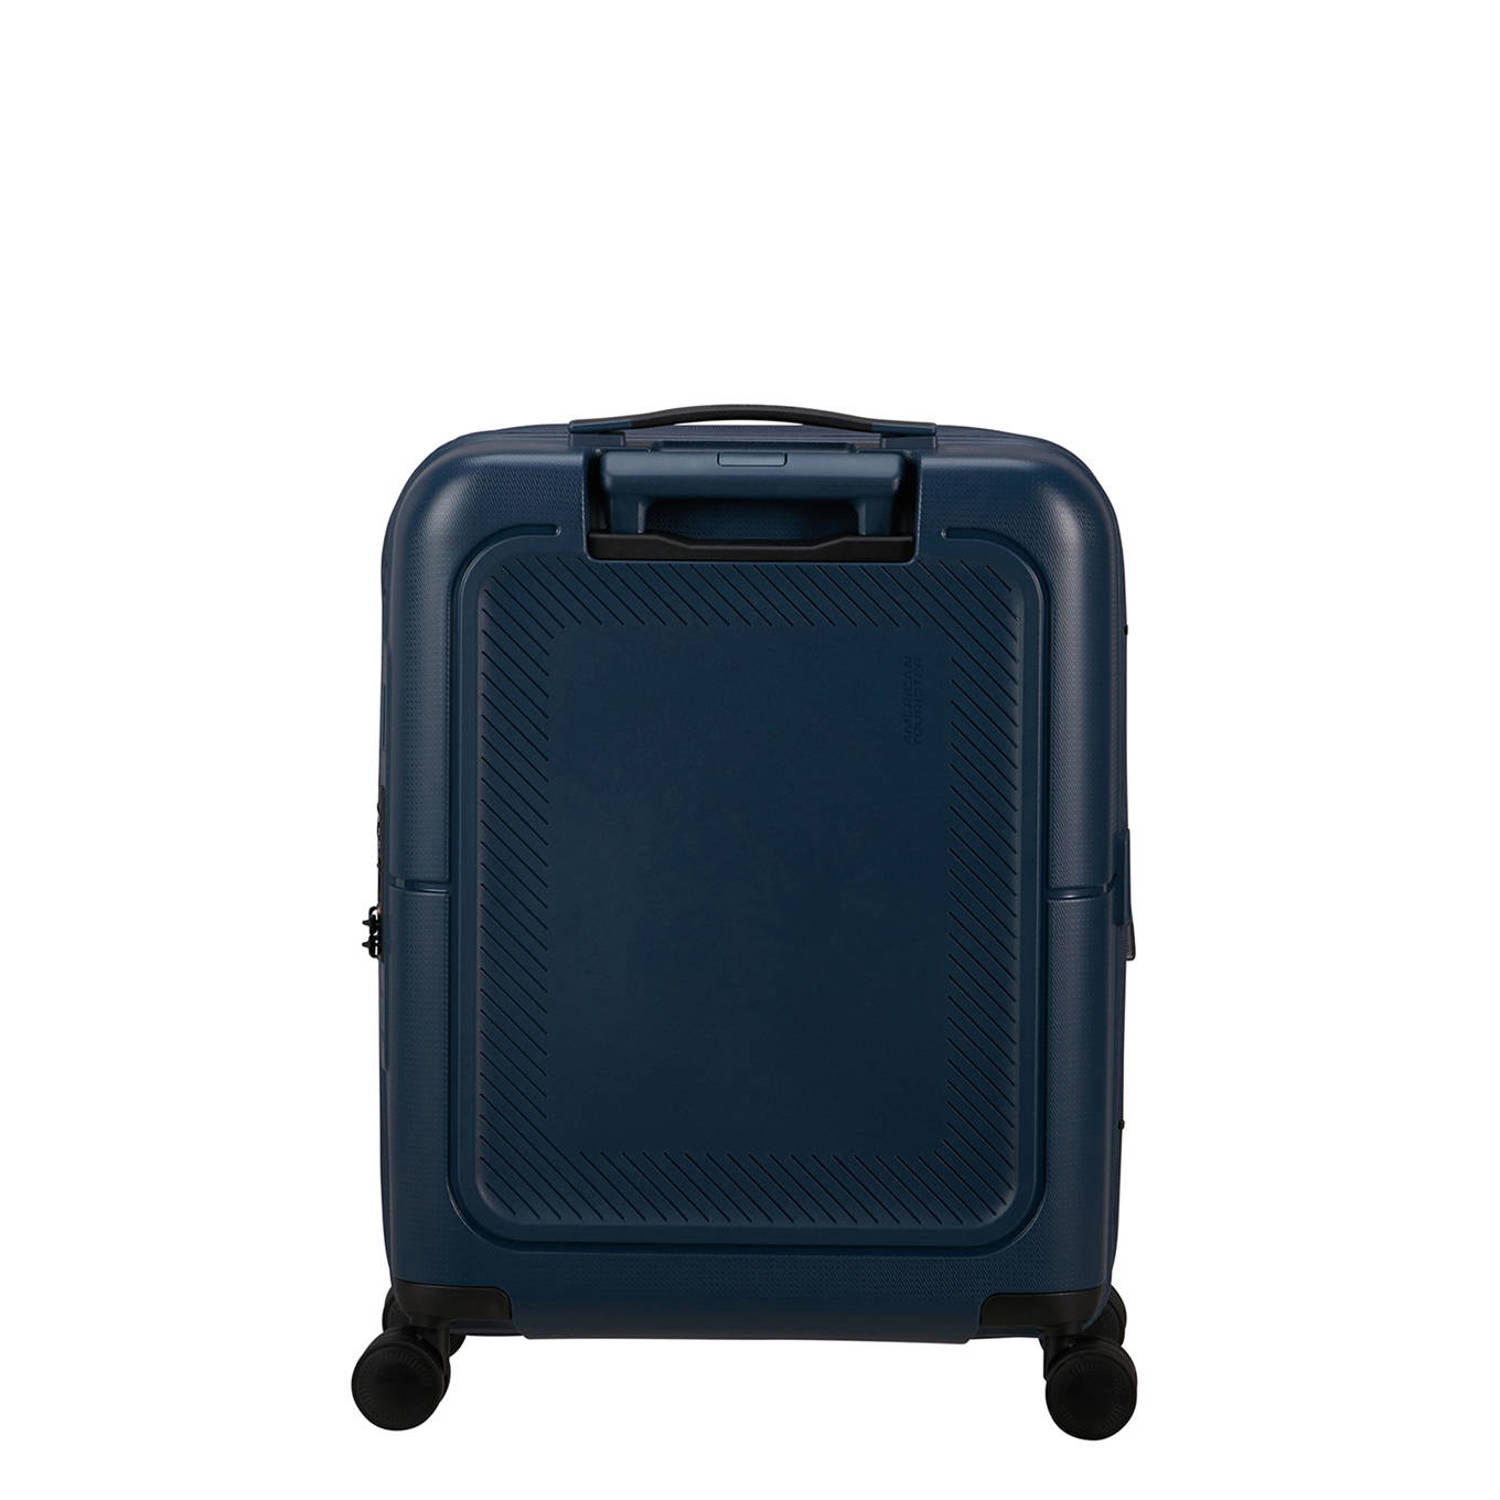 American Tourister trolley Dashpop 55 cm. Expandable donkerblauw